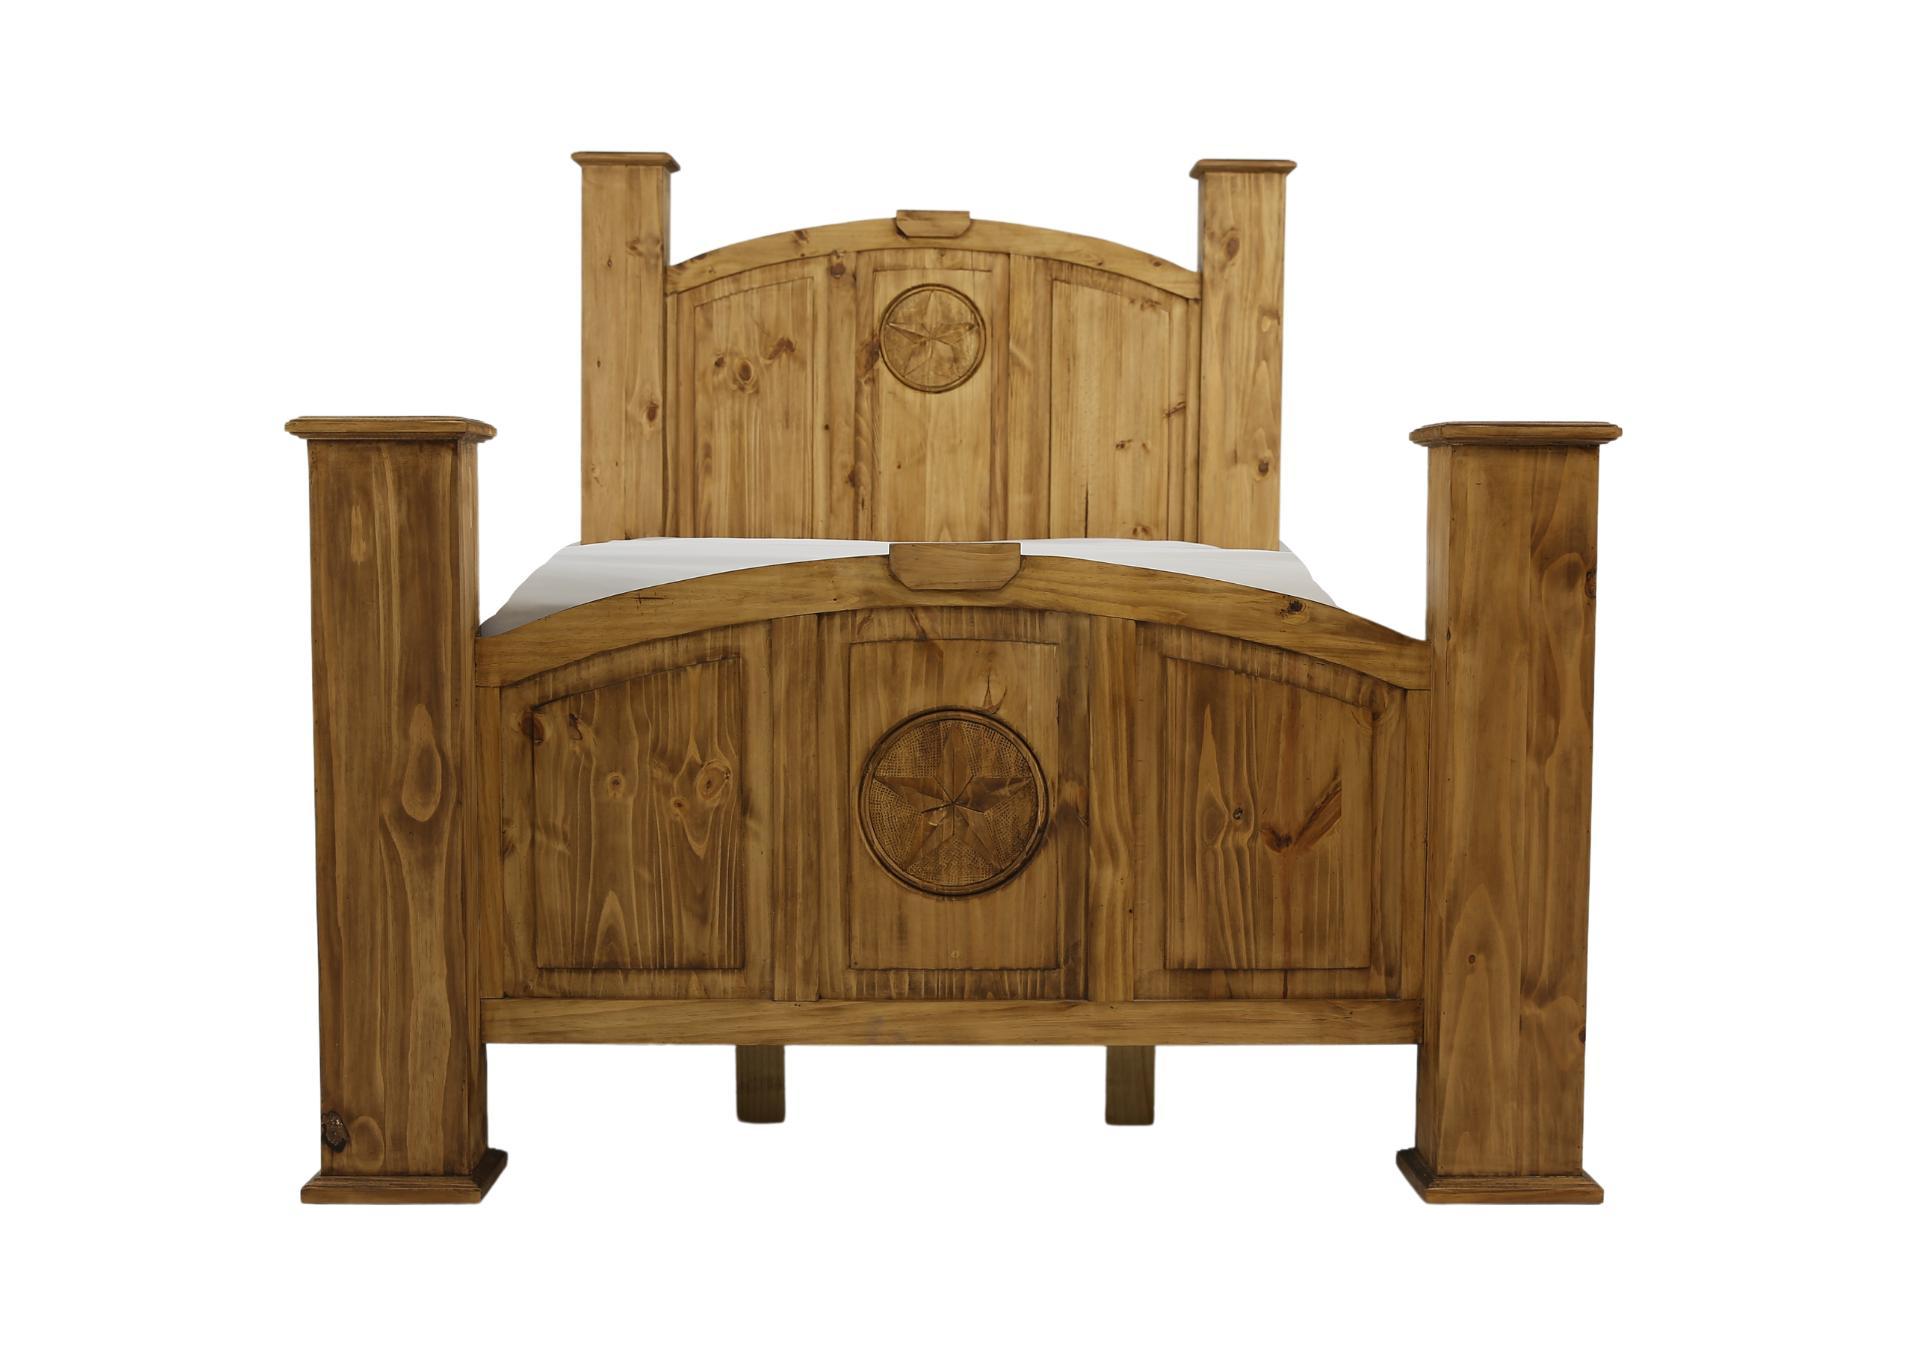 MANSION TEXAS STAR KING BED,ARDENT HOME